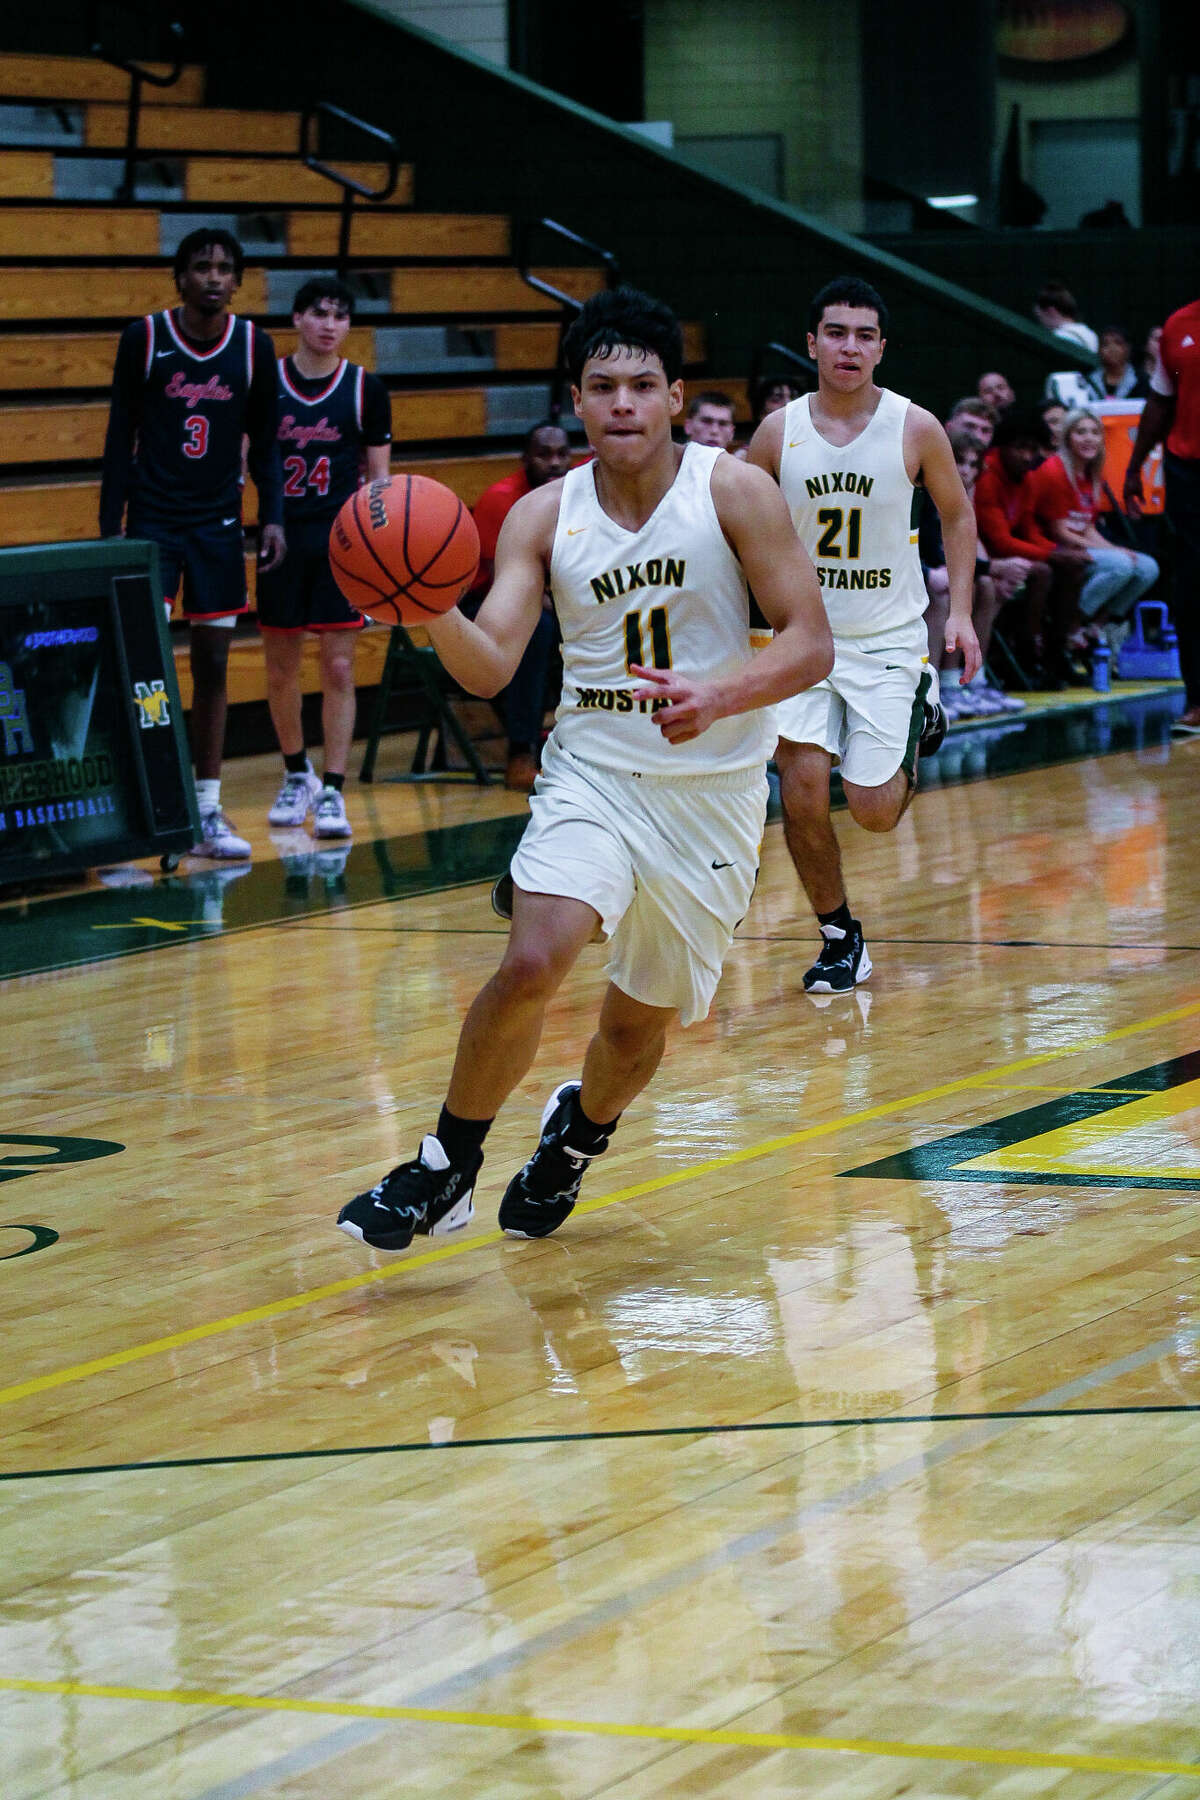 Nixon's Jose Escobar was named District 30-5A's Sixth Man of the Year.